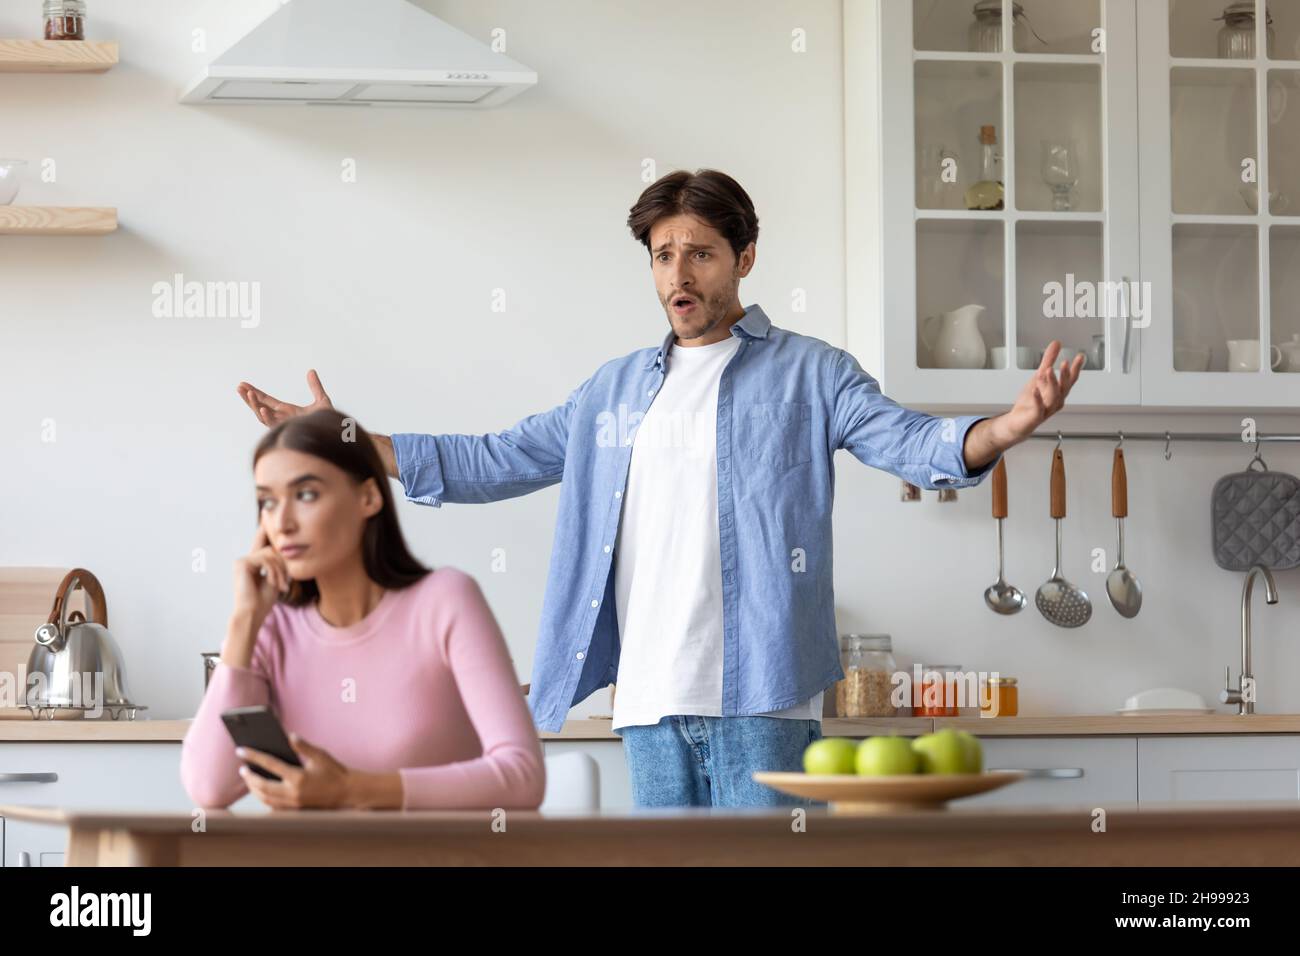 Sad young european woman with smartphone ignores offended angry screaming gesticulating husband Stock Photo